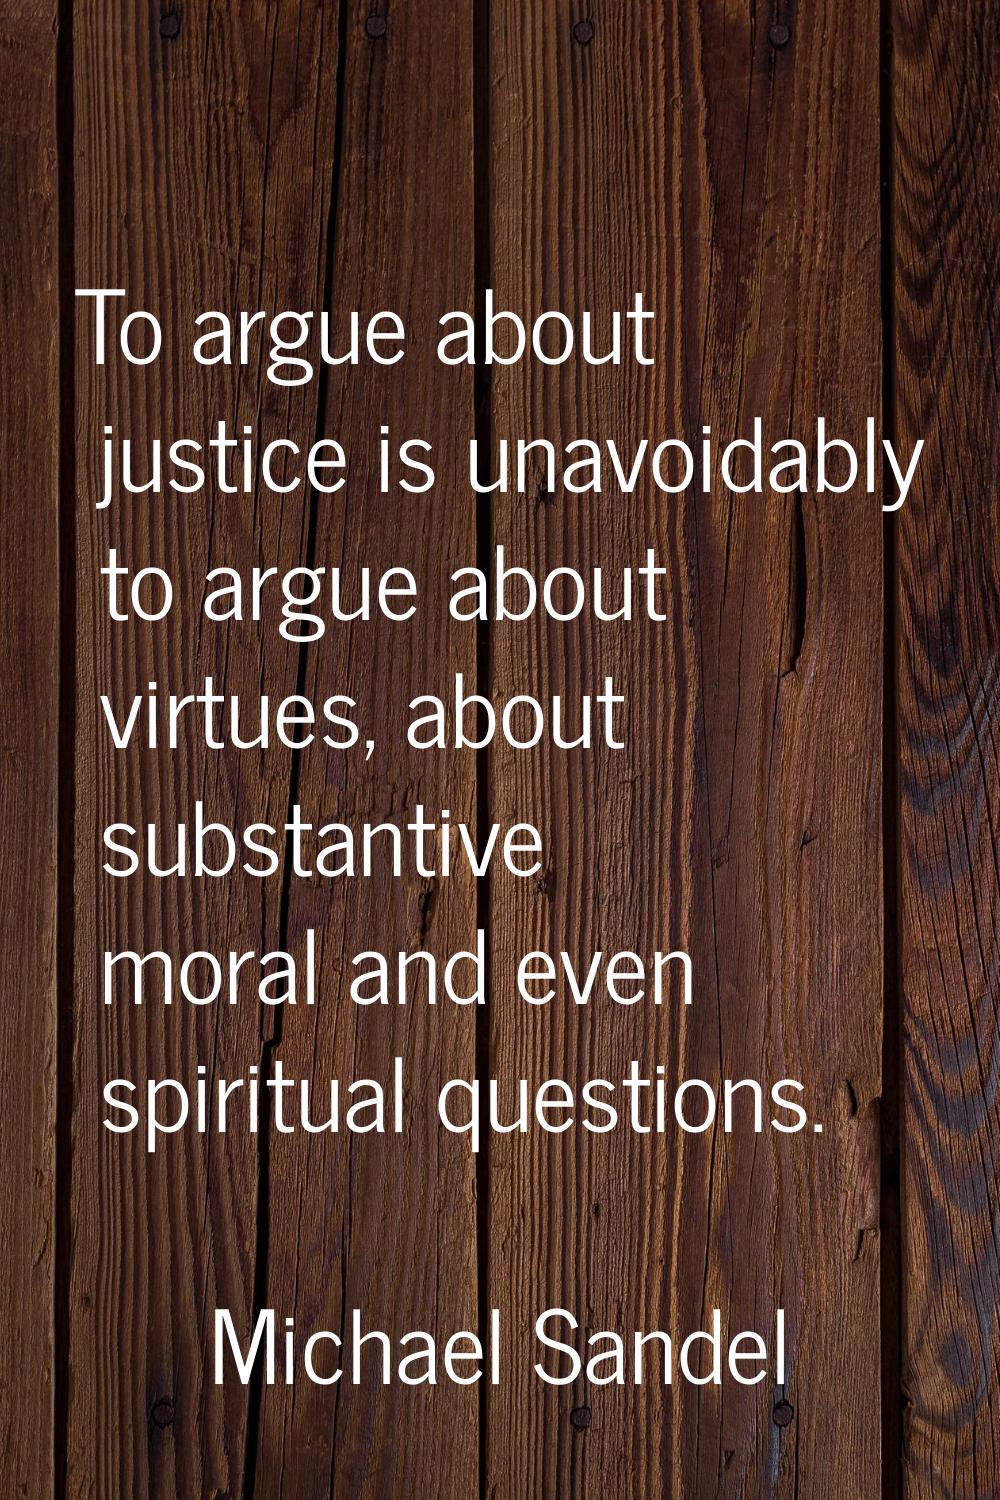 To argue about justice is unavoidably to argue about virtues, about substantive moral and even spir